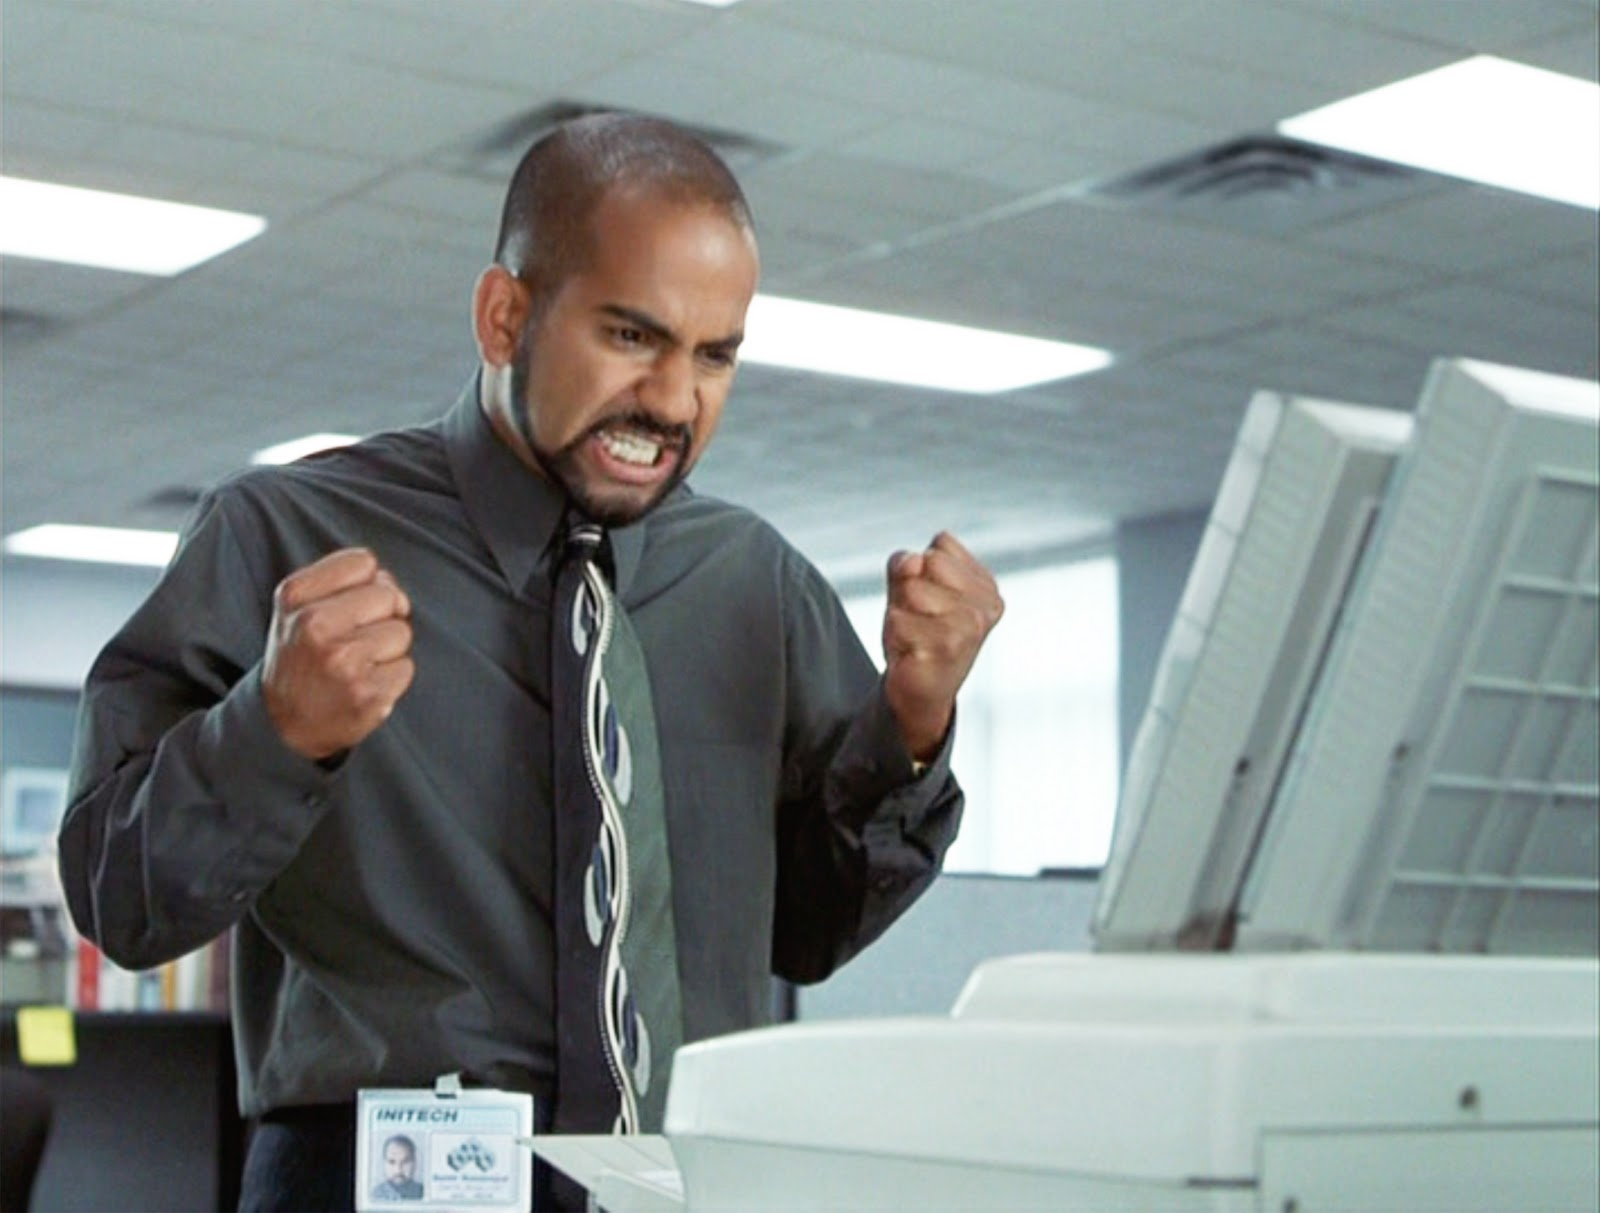 High Quality Office Space copier Blank Meme Template